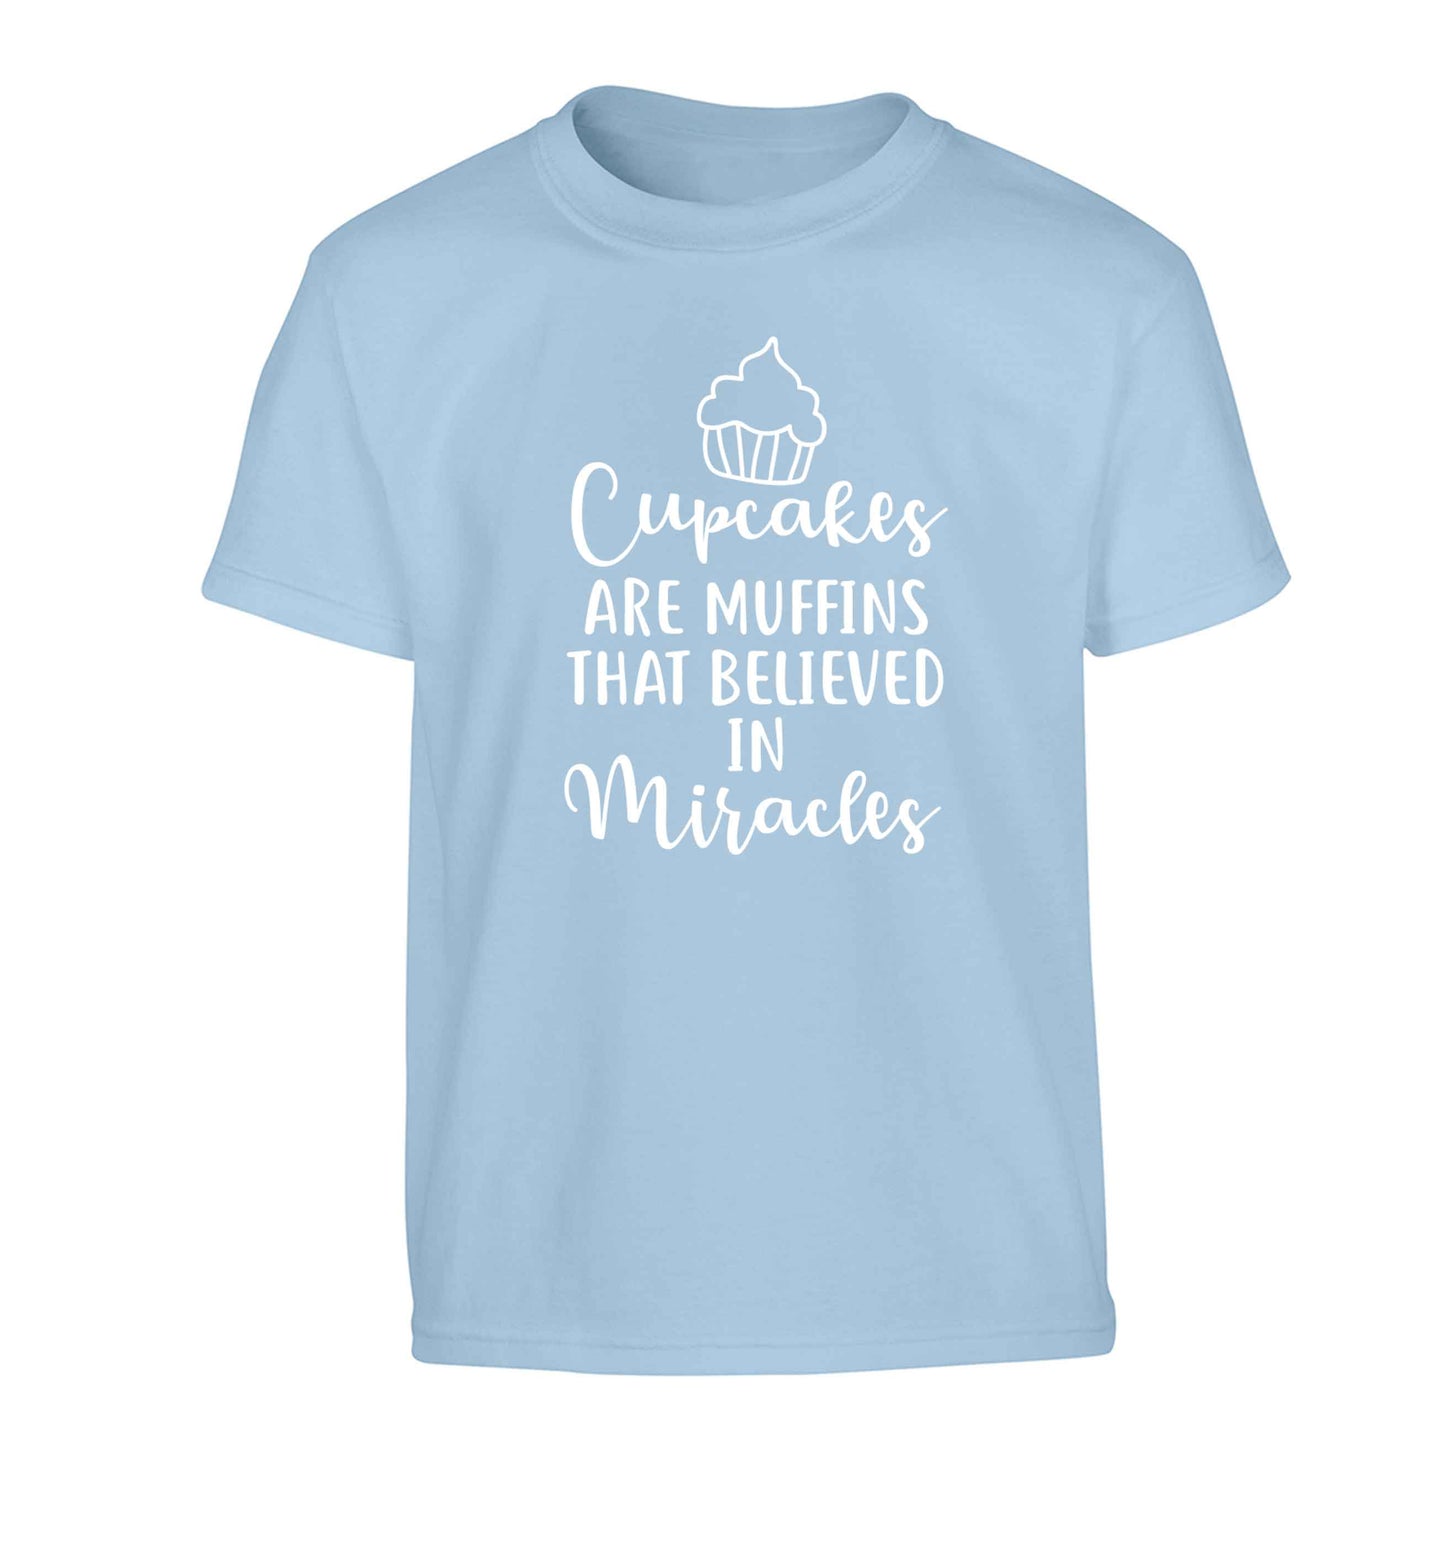 Cupcakes muffins that believed in miracles Children's light blue Tshirt 12-13 Years